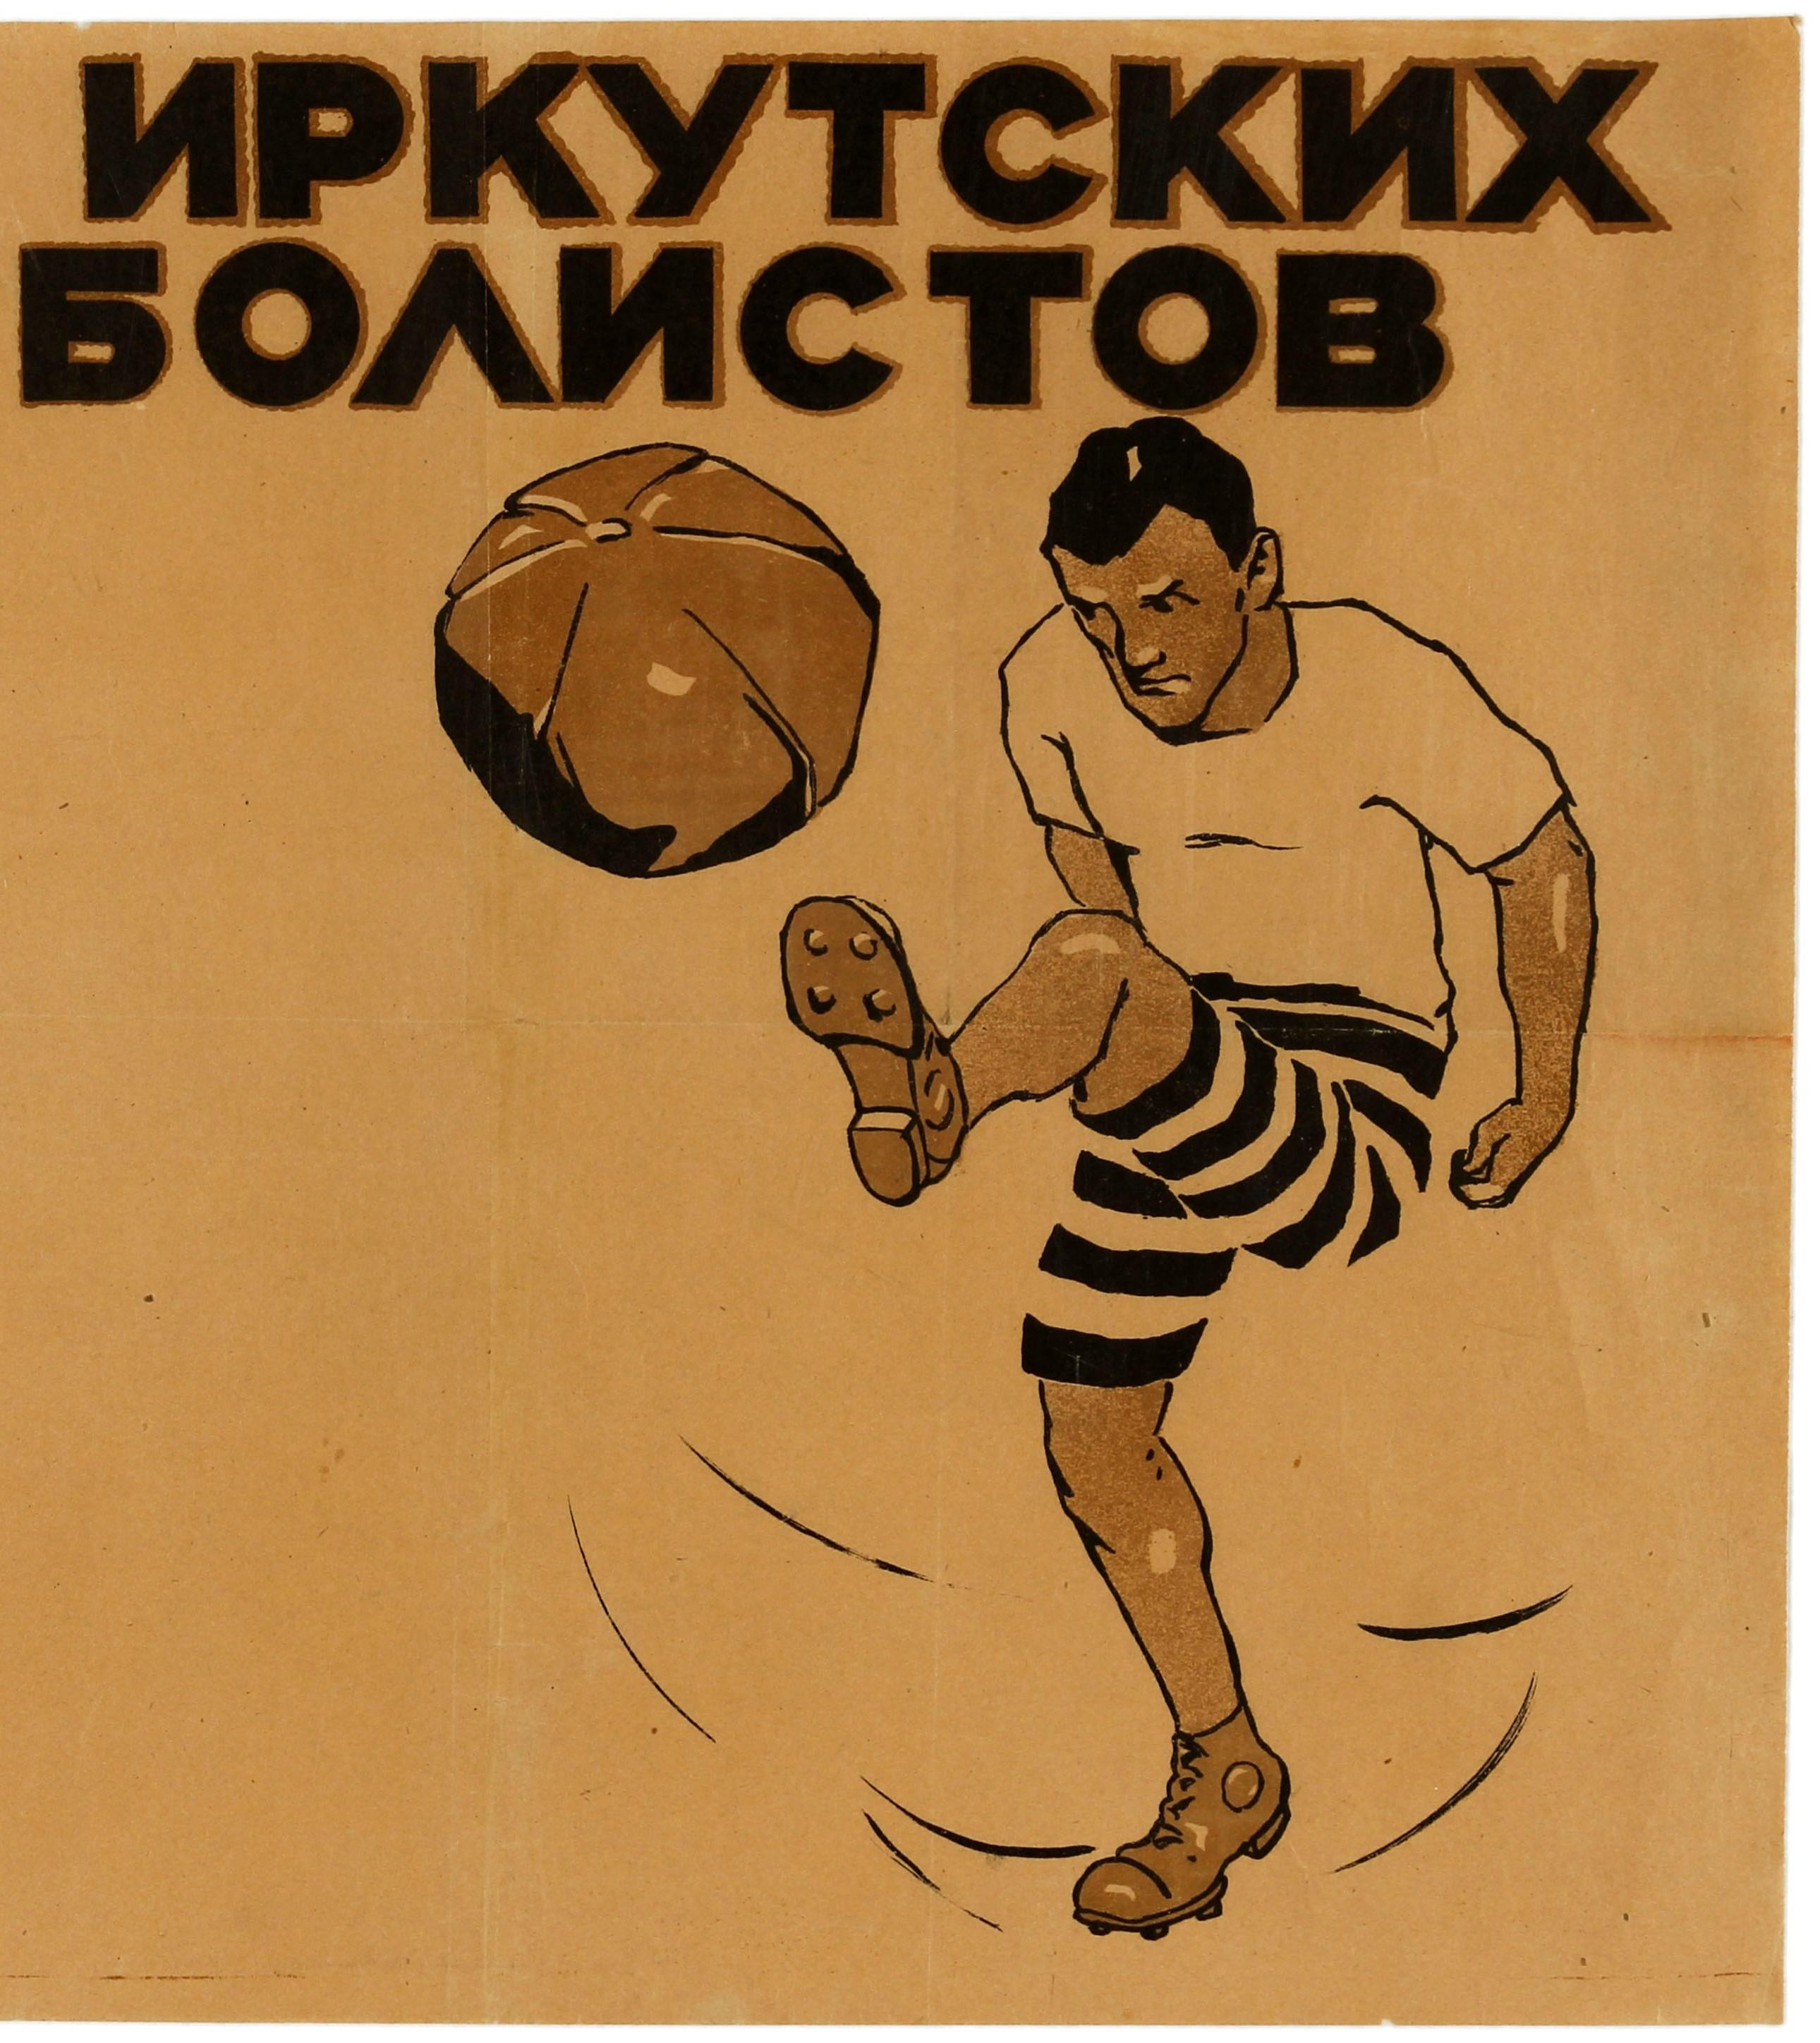 Original vintage sport poster promoting the Football League in Irkutsk Russia featuring a great design depicting a footballer wearing striped shorts and kicking a ball with the stylised text above. Irkutsk is one of the largest cities in Siberia